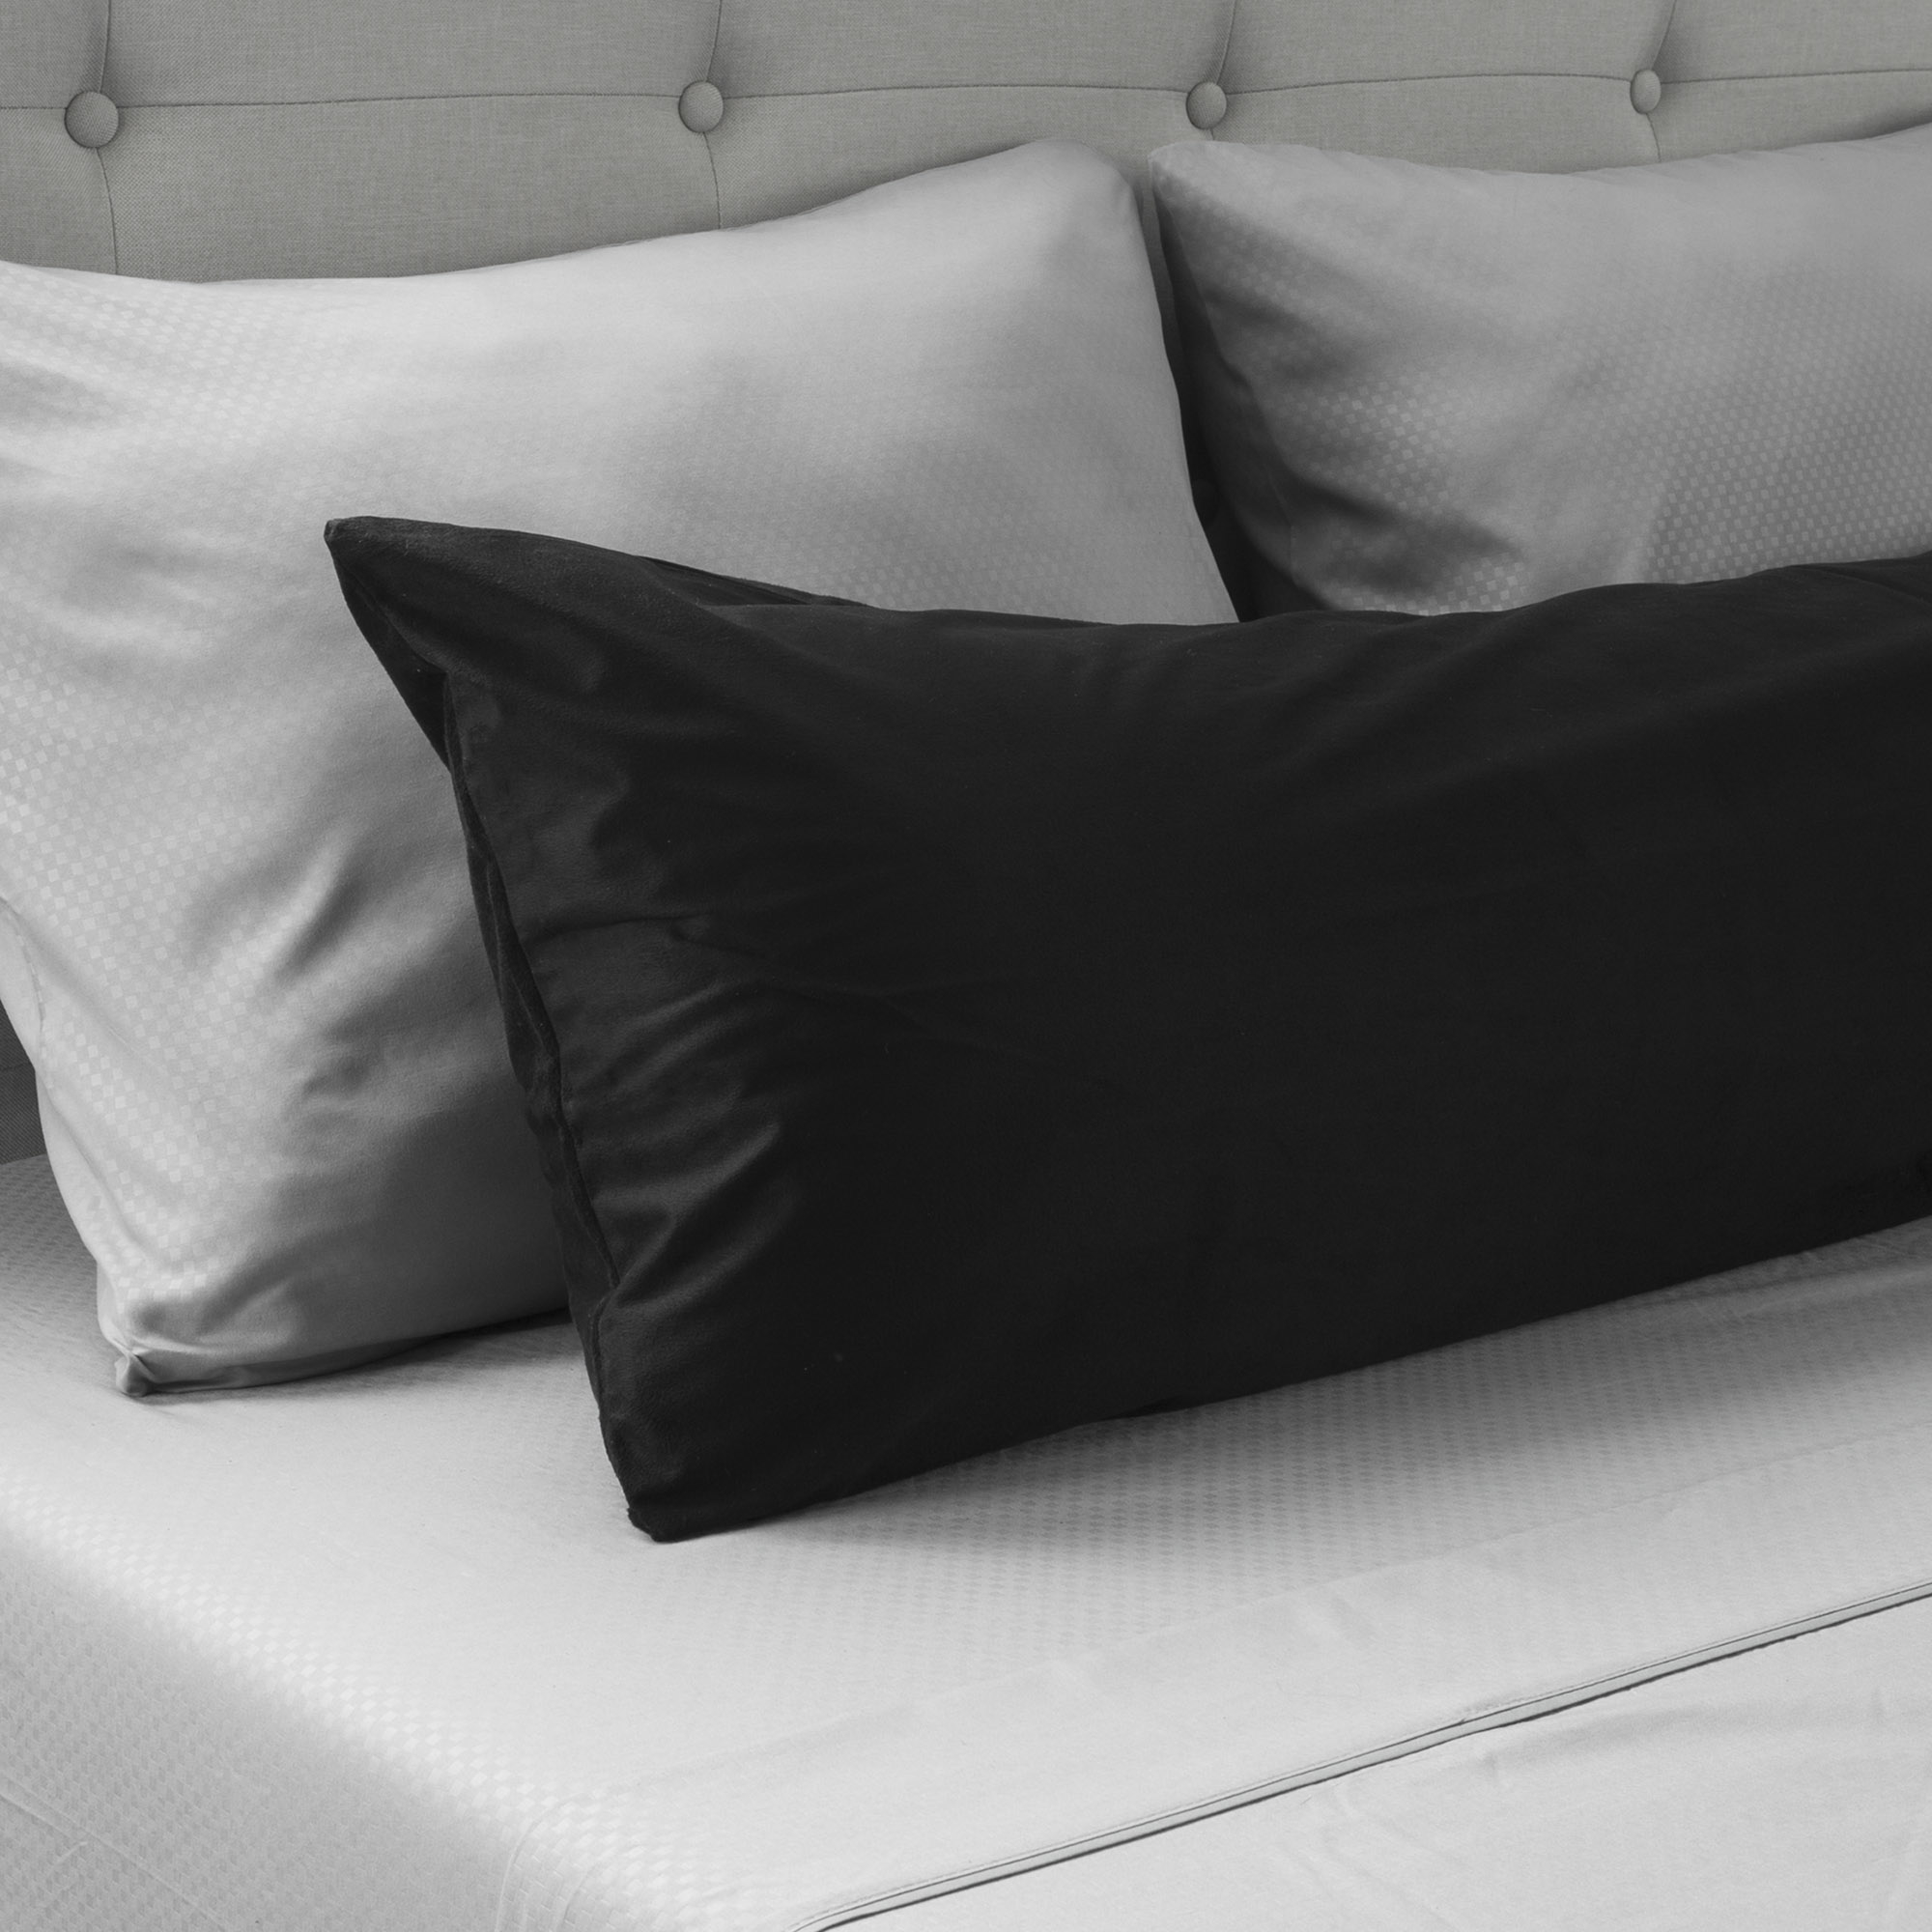 Microsuede Body Pillow Cover Pillowcase Zippered Washable 51 X 17 Inches Black